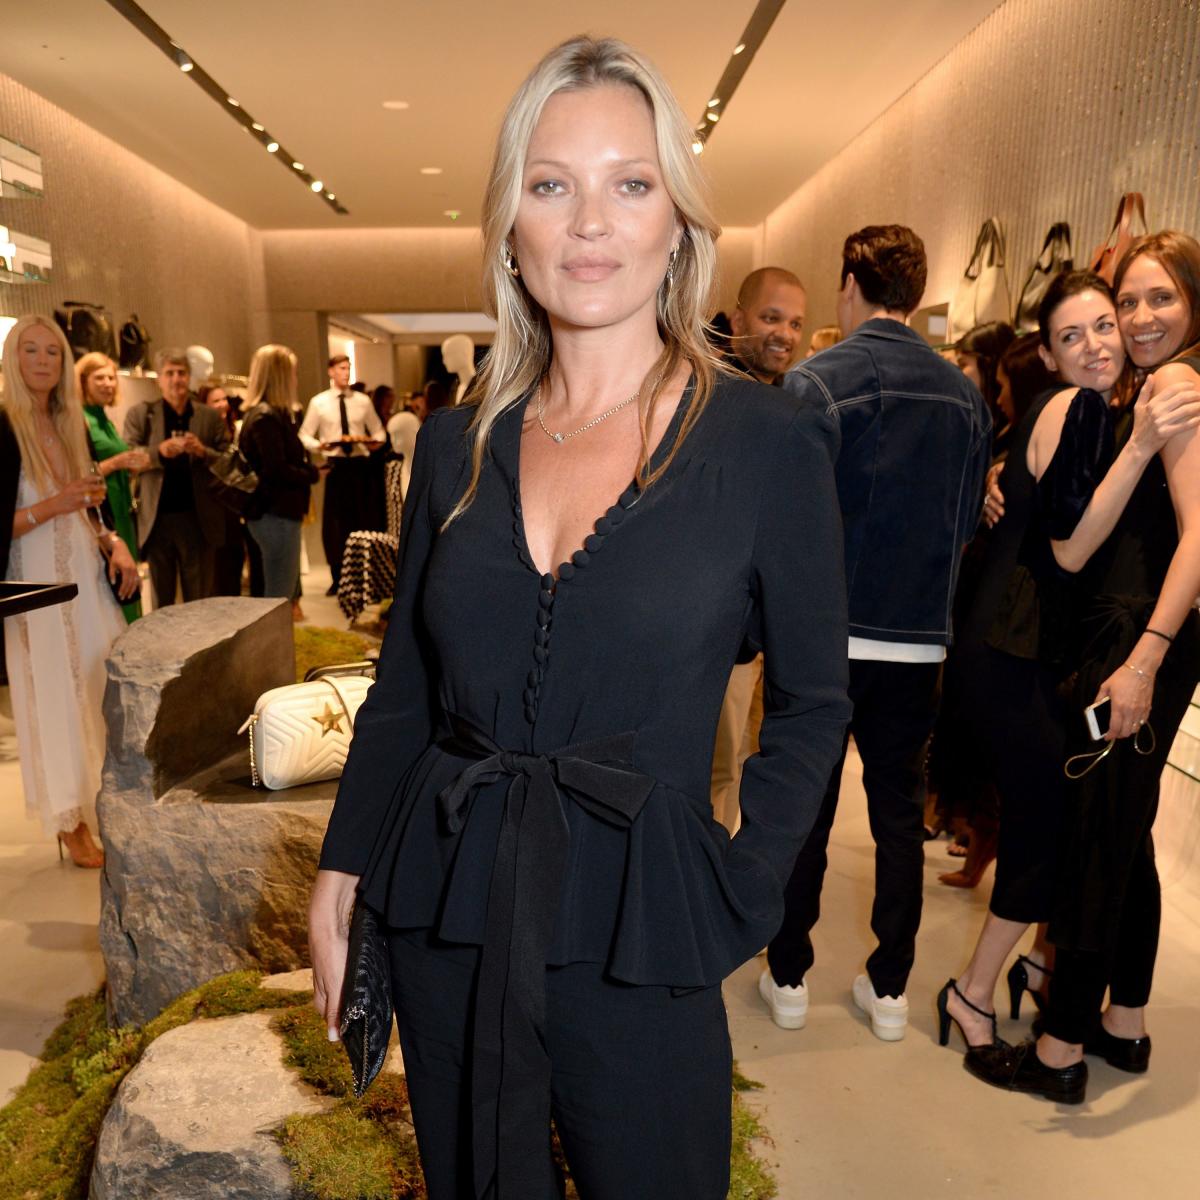 Kate Moss' Ibizan fishnet dress proves why she's still a style icon